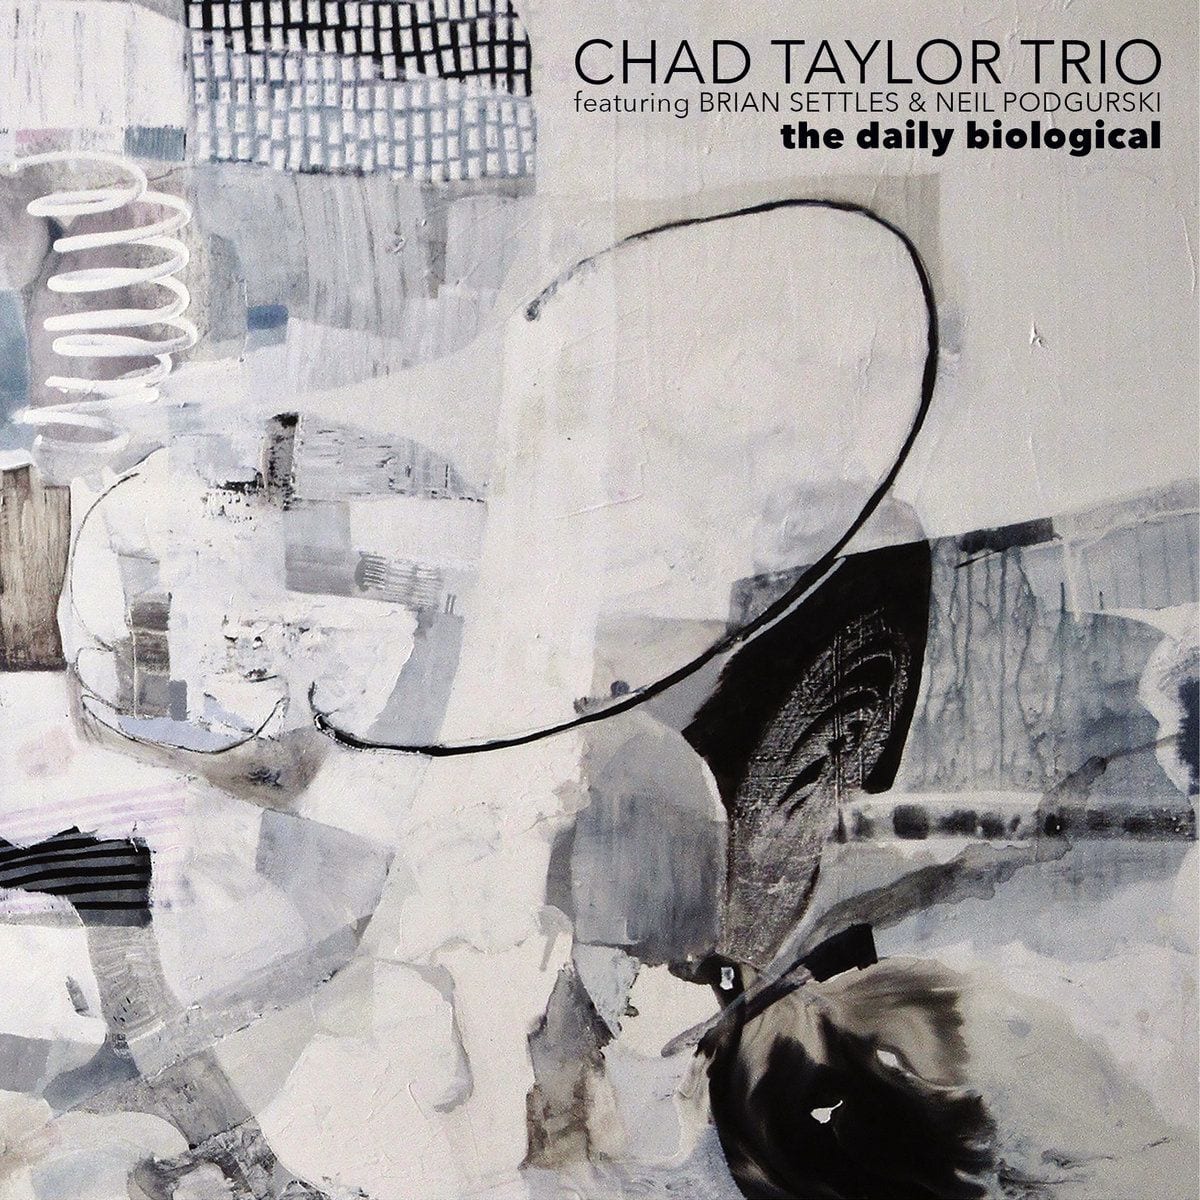 The Chad Taylor Trio Get Funky and Fiery on ‘The Daily Biological’